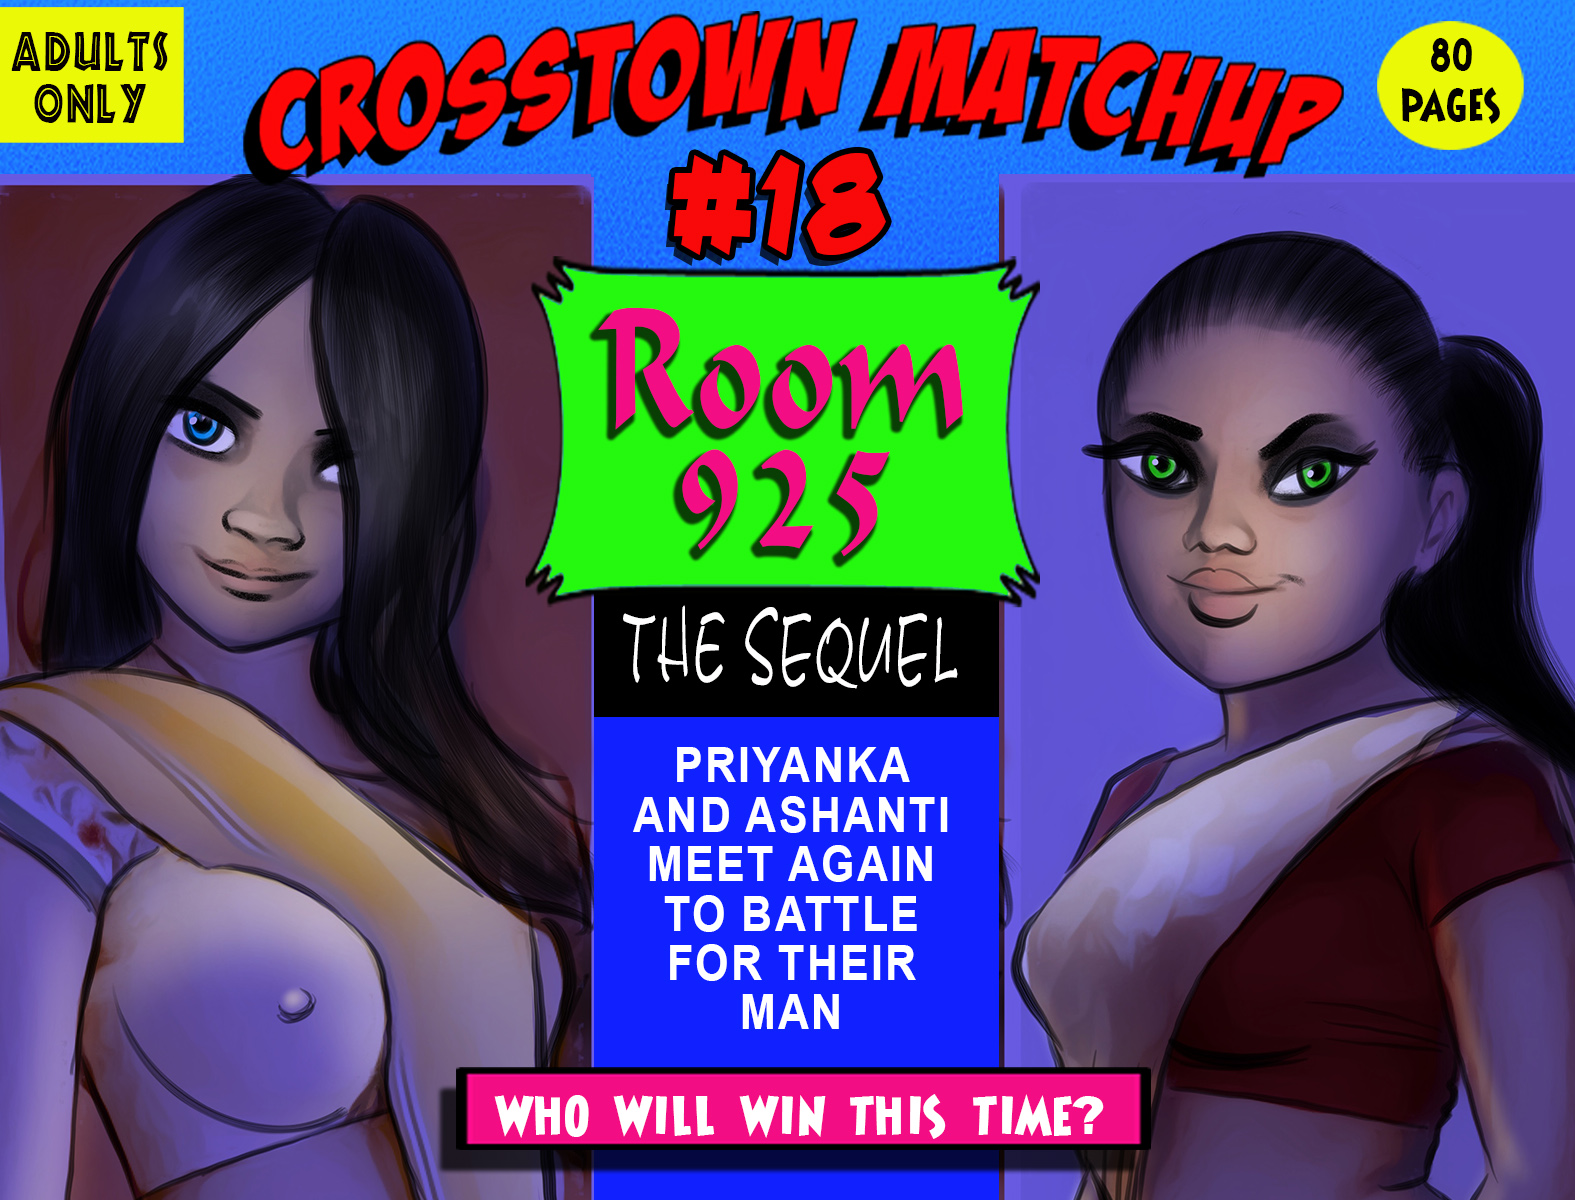 ROOM 921 : THE SEQUEL Crosstown matchup #18